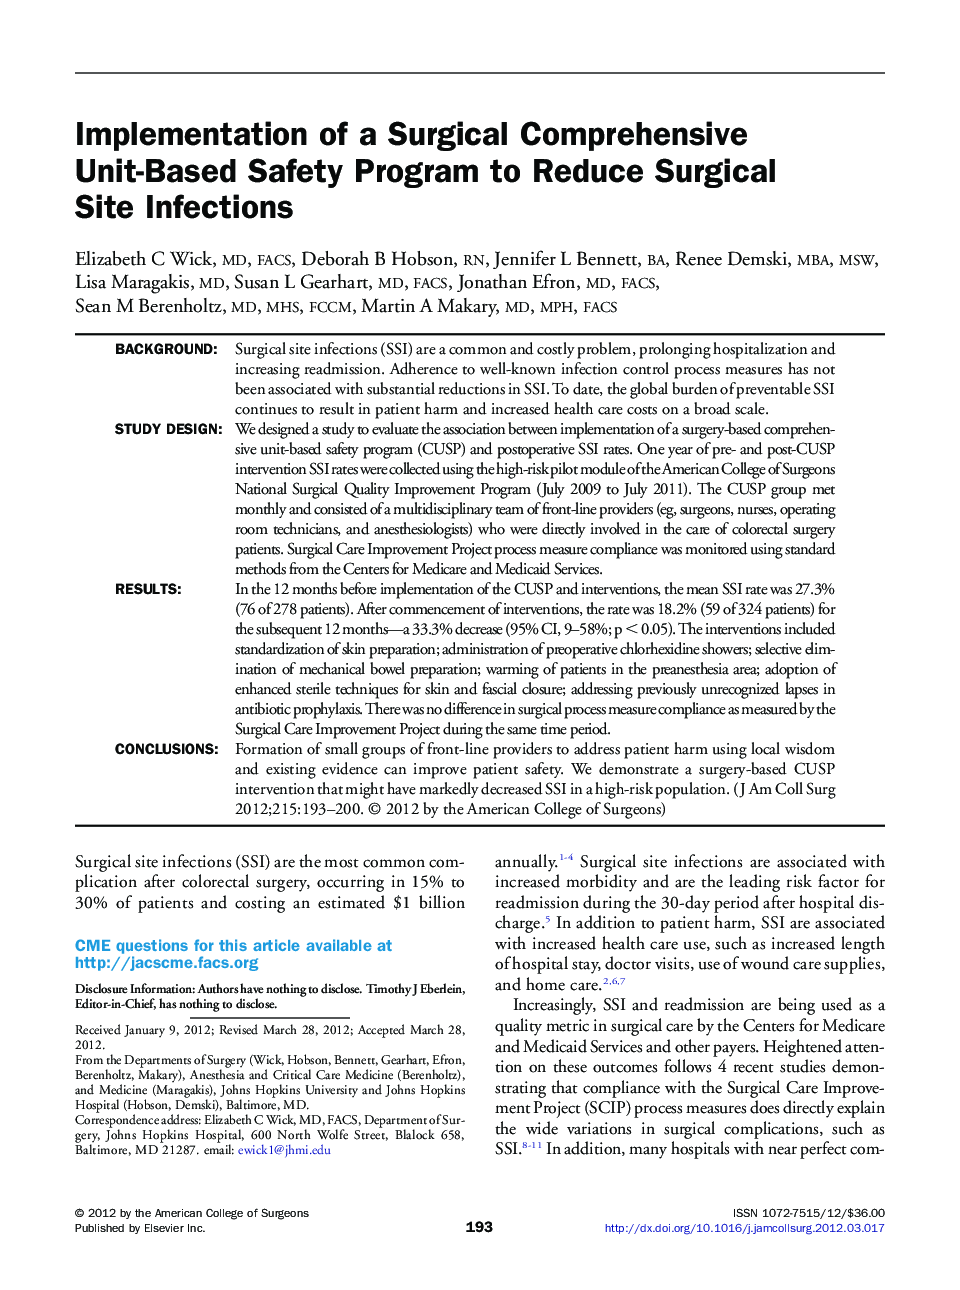 Implementation of a Surgical Comprehensive Unit-Based Safety Program to Reduce Surgical Site Infections 